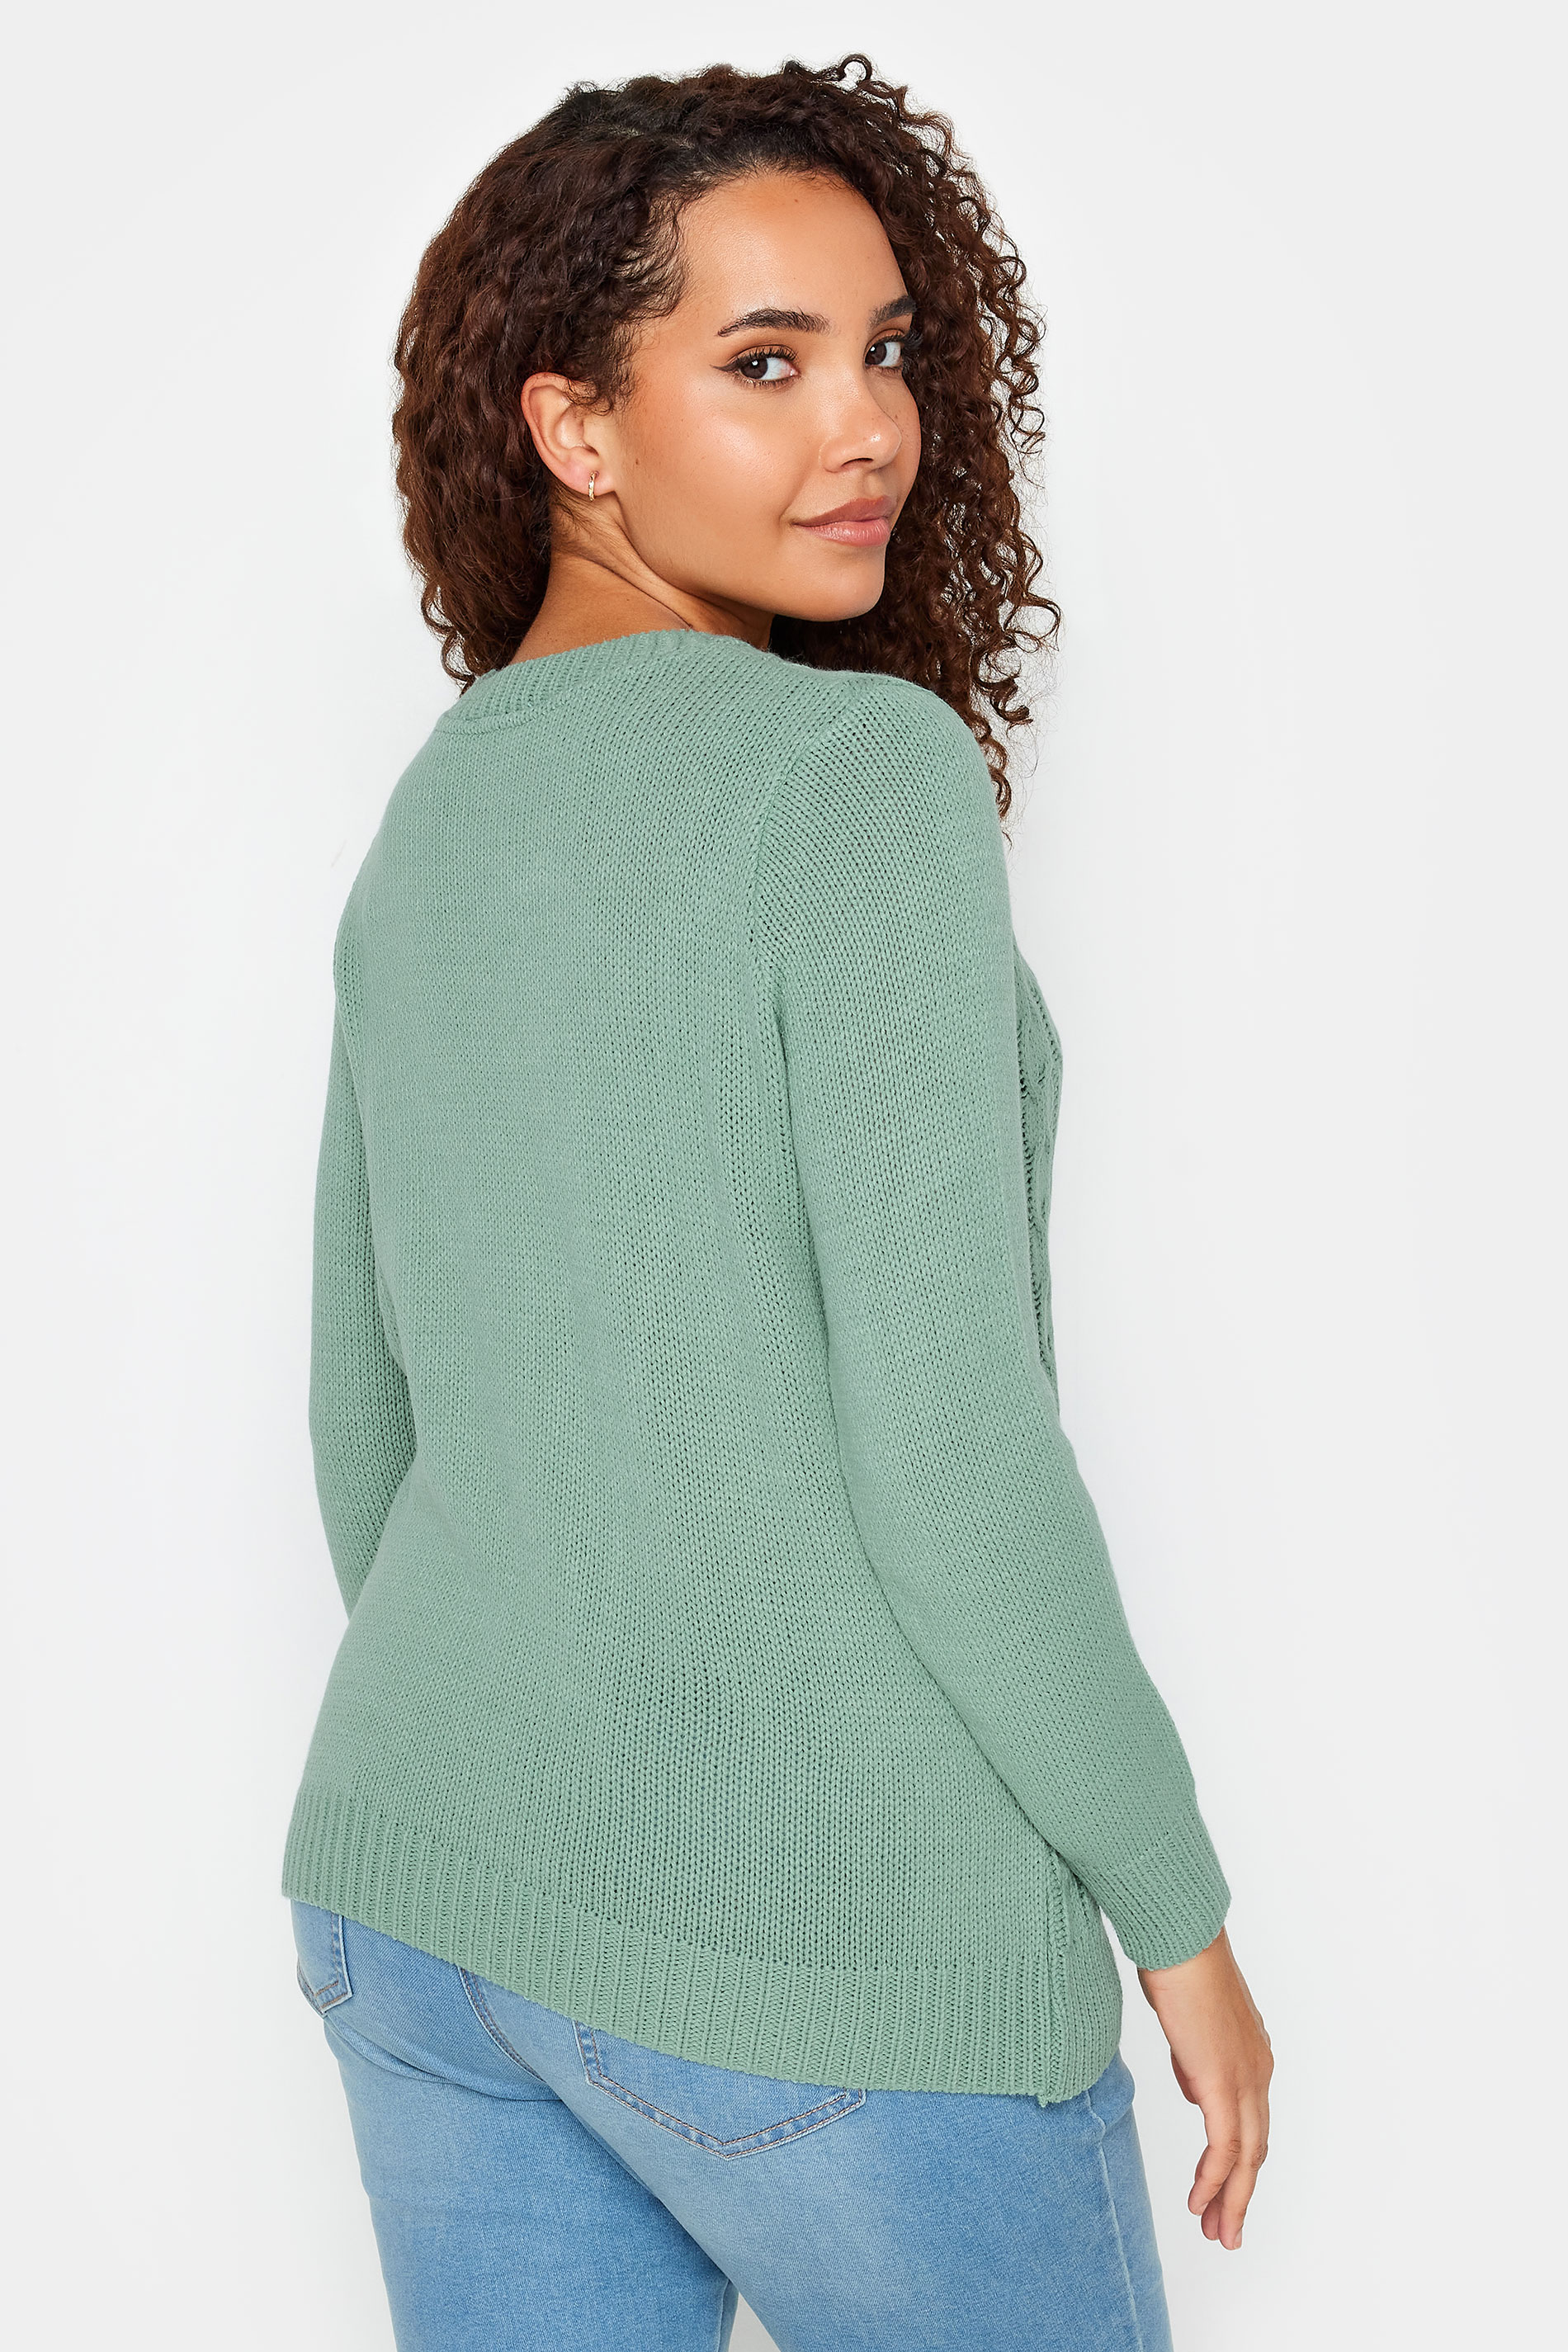 M&Co Green Cable Knit Jumper | M&Co 3